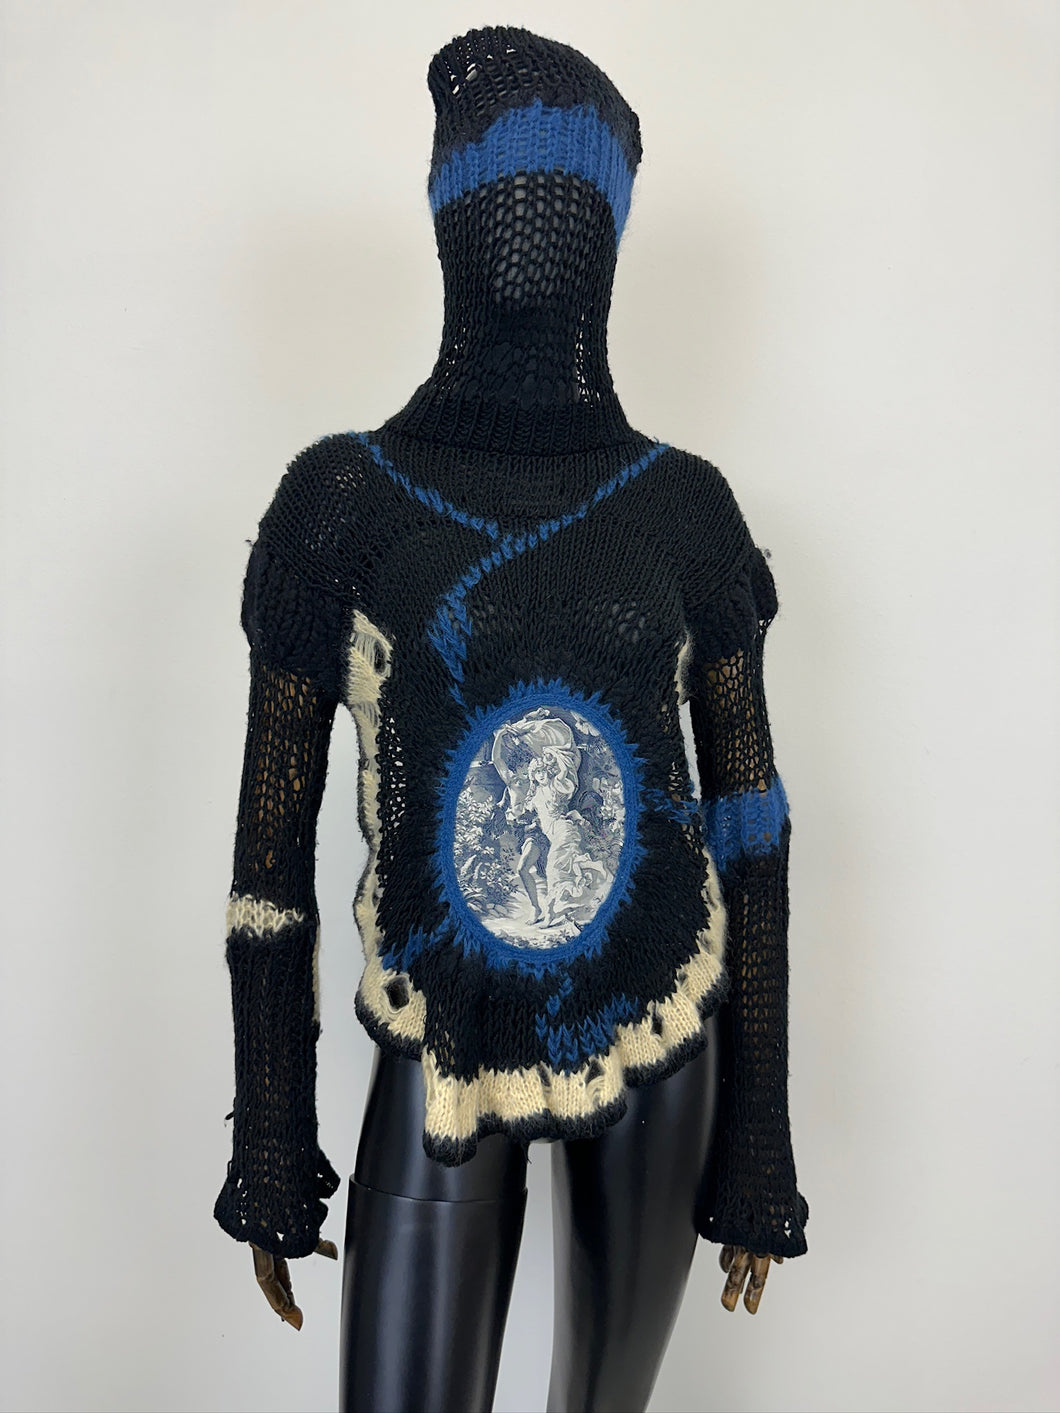 AW2007 Jean Paul Gaultier crochet knit with mask